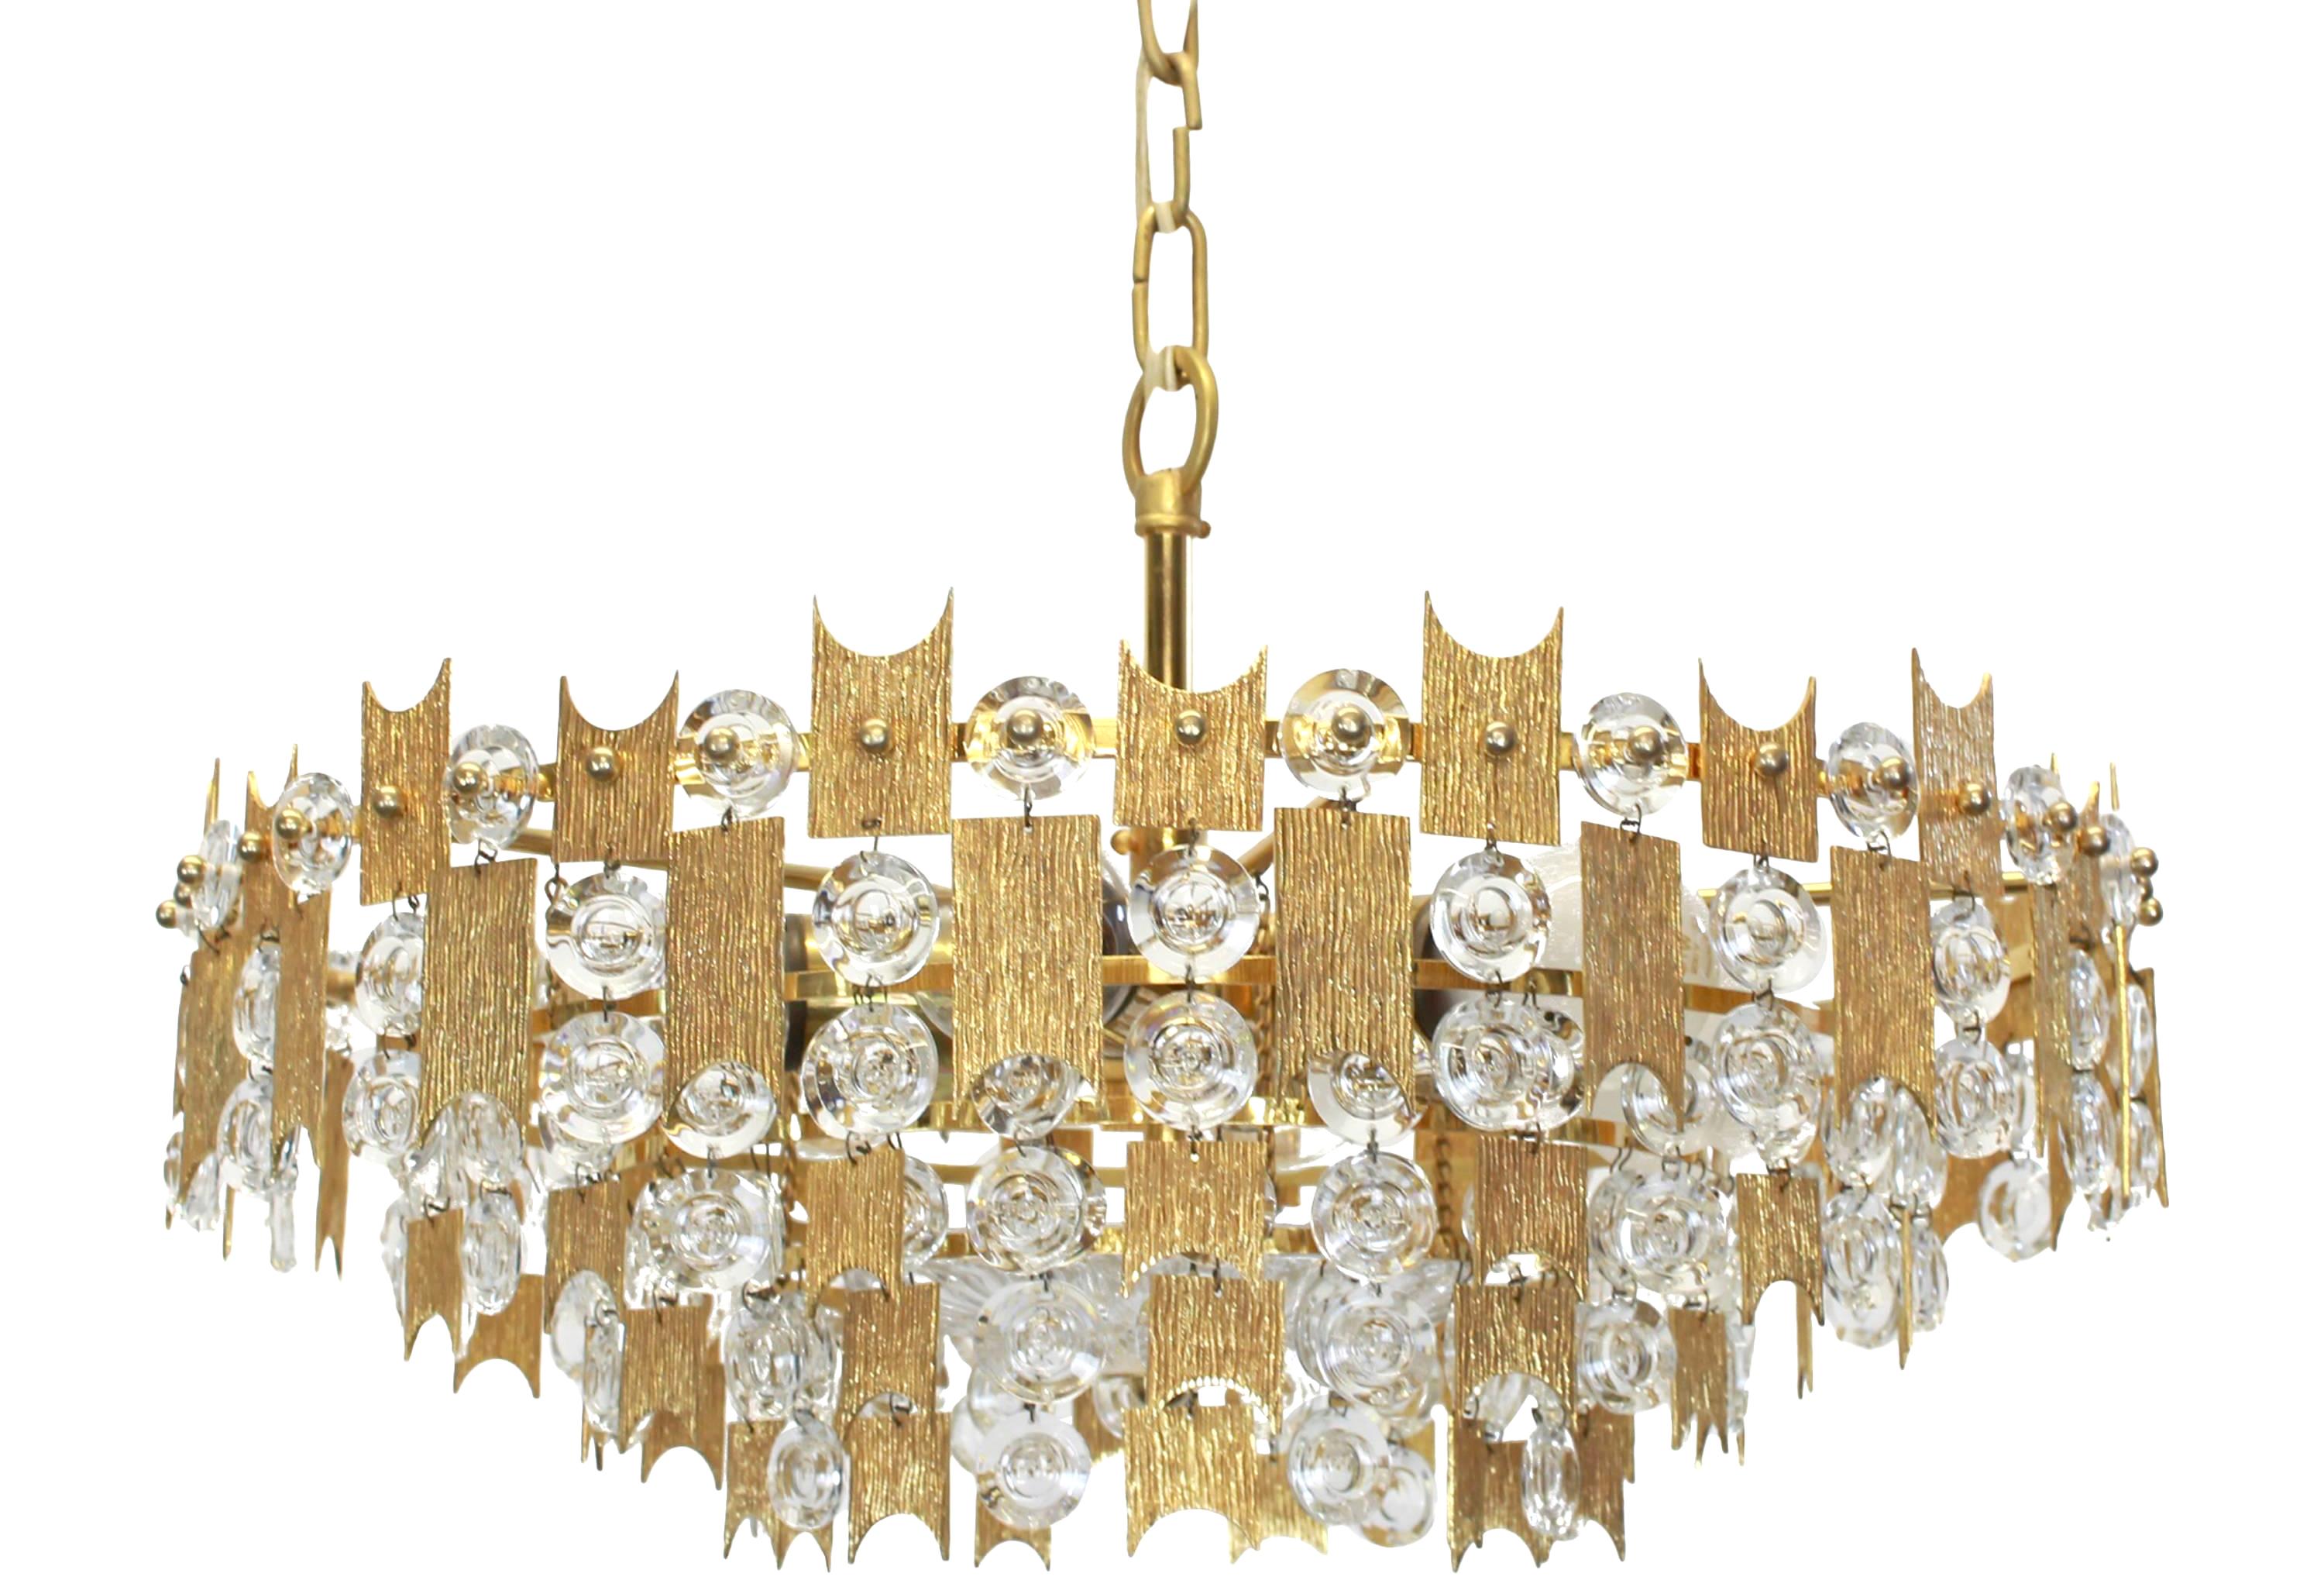 A stunning chandelier by Palwa (Palme and Walter), Germany, manufactured in the 1960s. It’s composed of jewel-like glass pieces and brass plates with a Brutalist relief.

Sockets: It needs six x E27 standard bulbs to illuminate, and it's